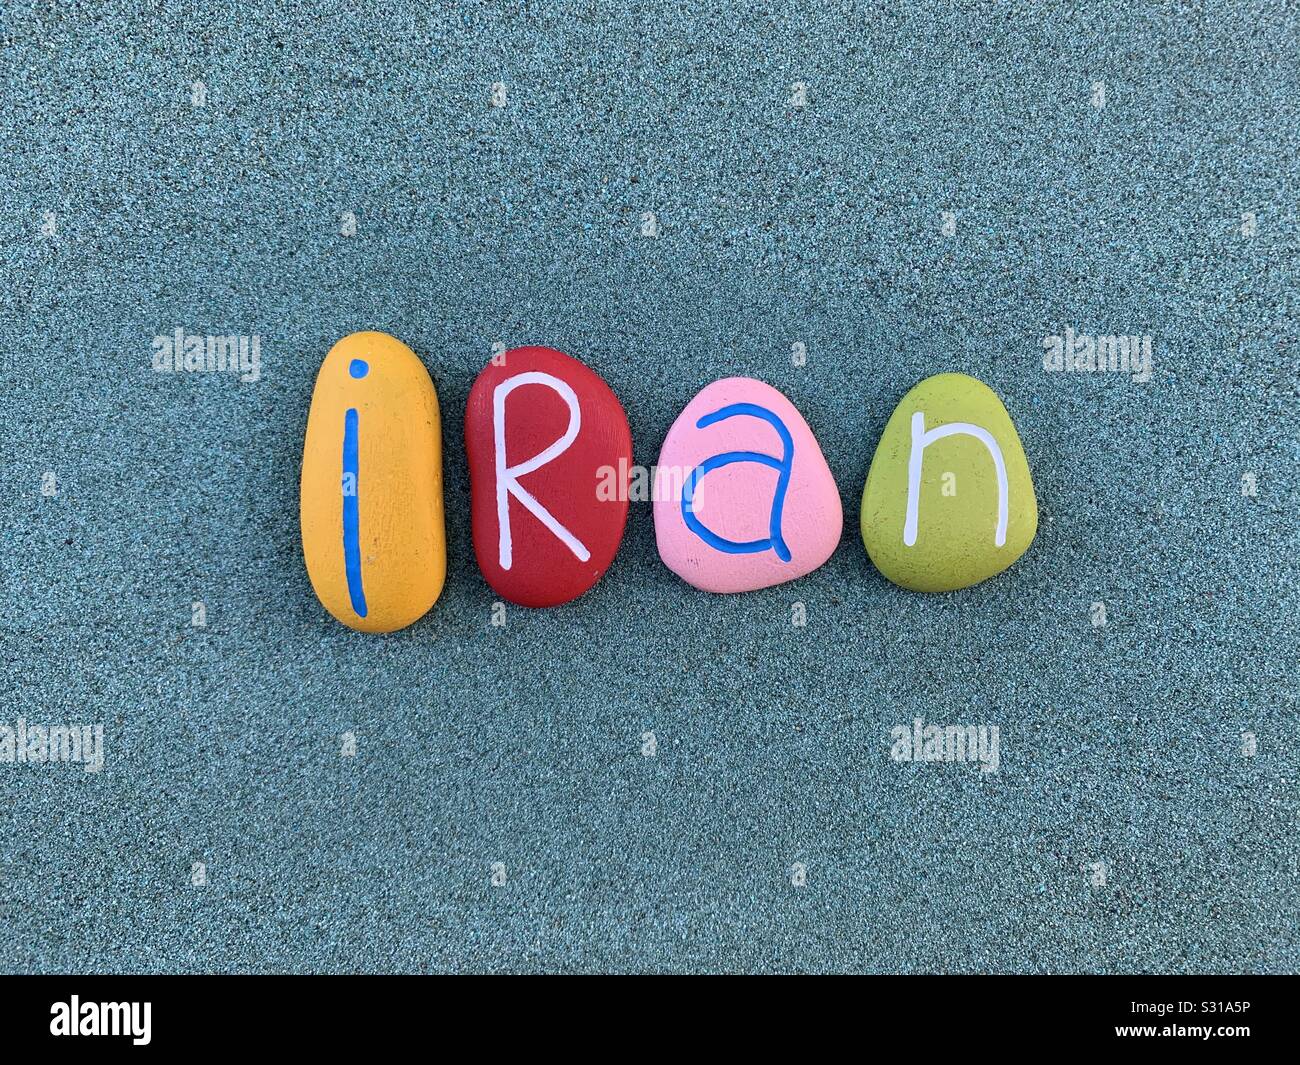 Iran, Islamic Republic of Iran, country in Western Asia, souvenir with multi colored stone letters over green sand Stock Photo